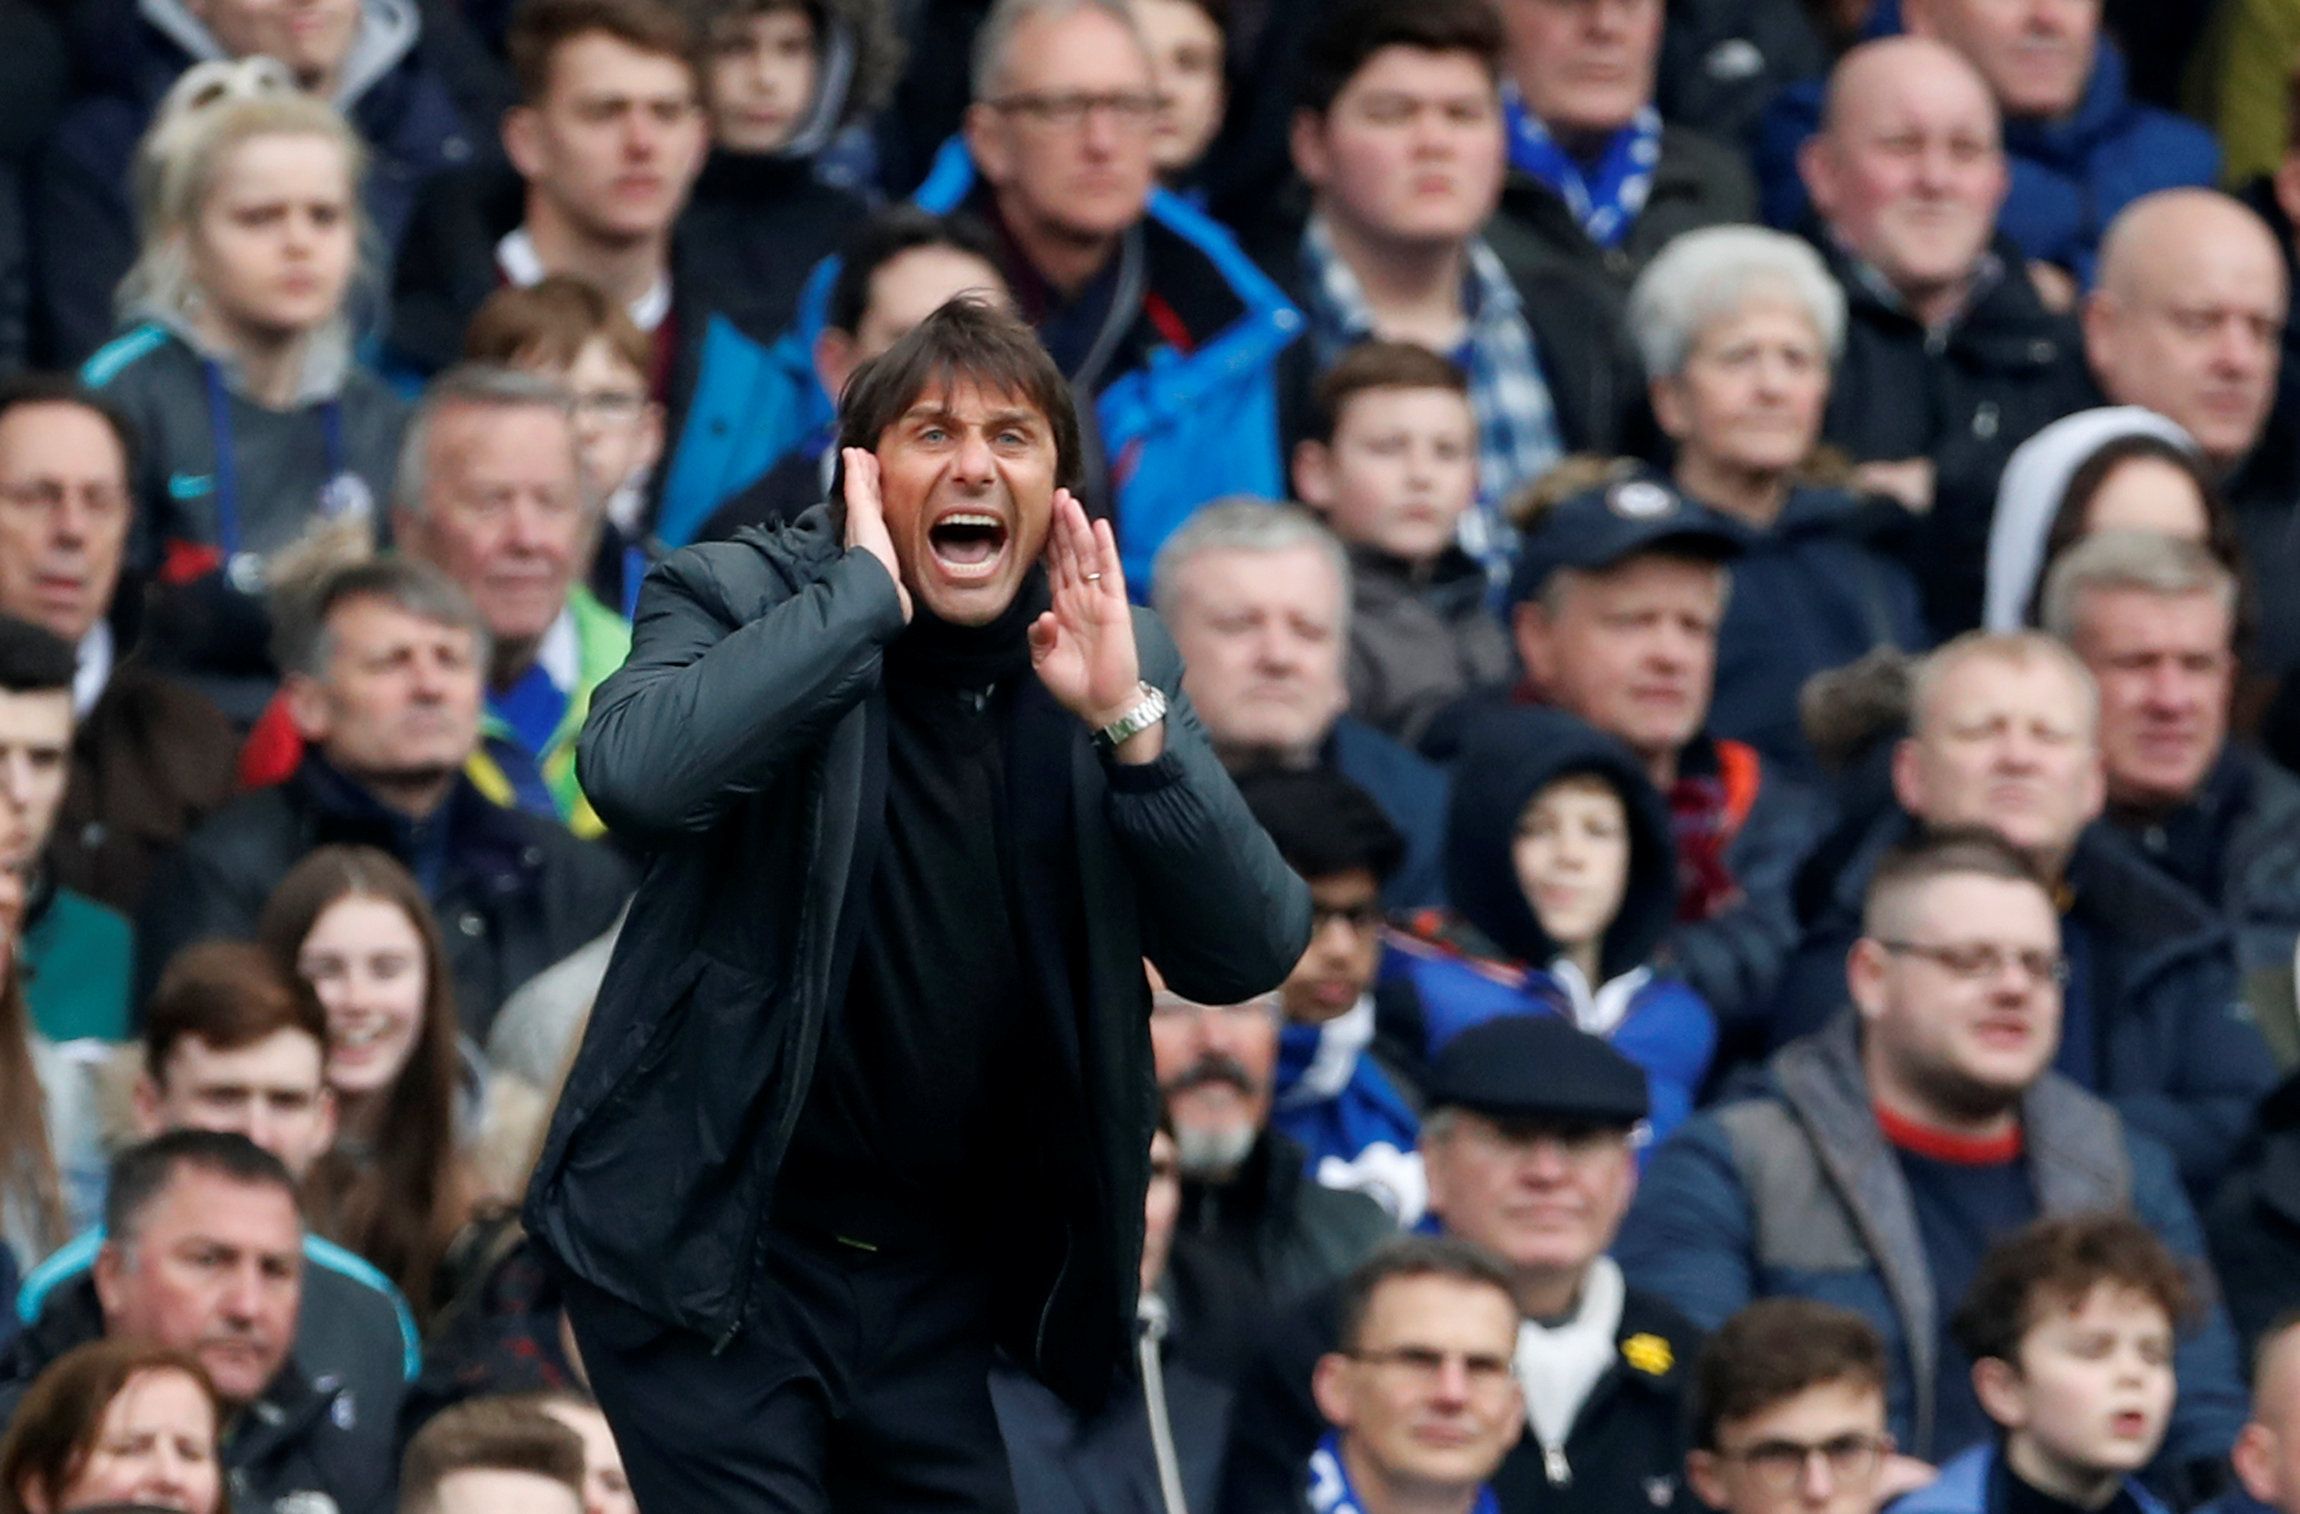 Soccer Football - Premier League - Chelsea vs Tottenham Hotspur - Stamford Bridge, London, Britain - April 1, 2018   Chelsea manager Antonio Conte   Action Images via Reuters/Matthew Childs    EDITORIAL USE ONLY. No use with unauthorized audio, video, data, fixture lists, club/league logos or 